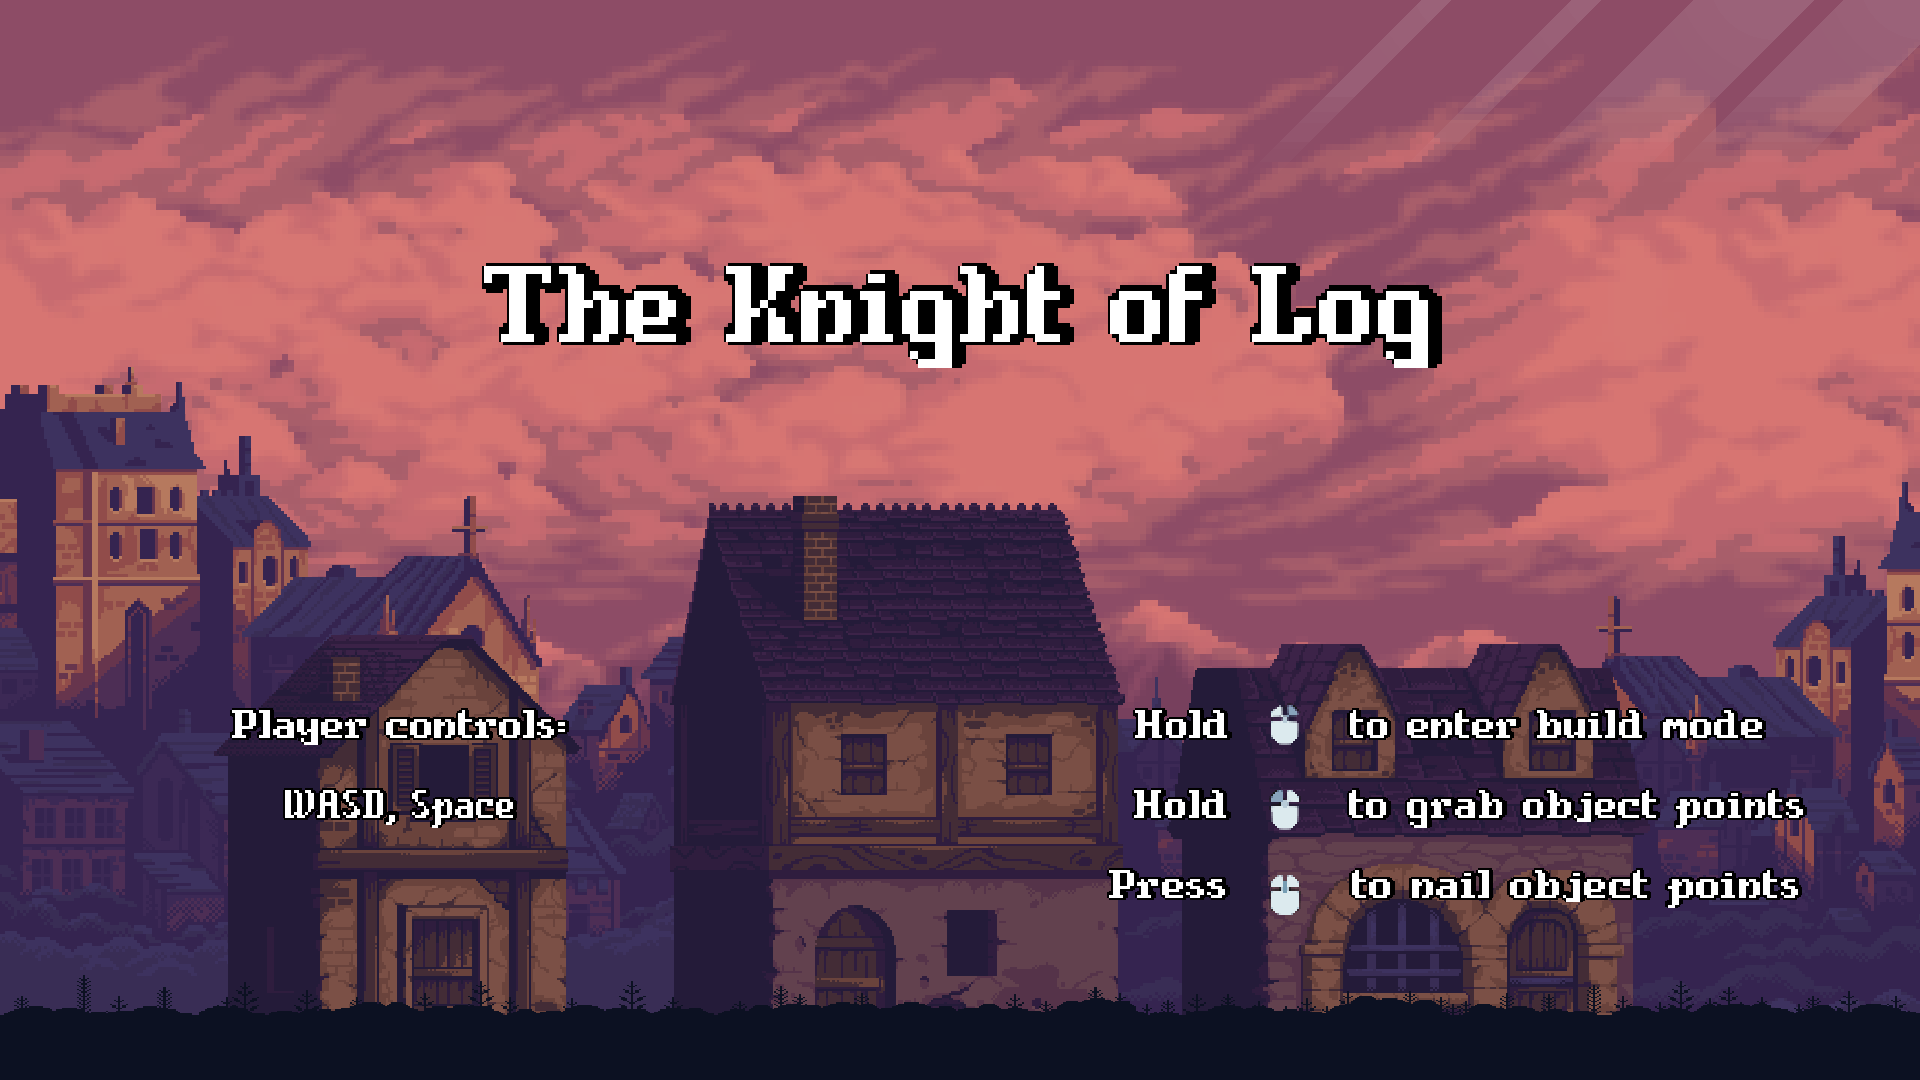 The Knight of Log